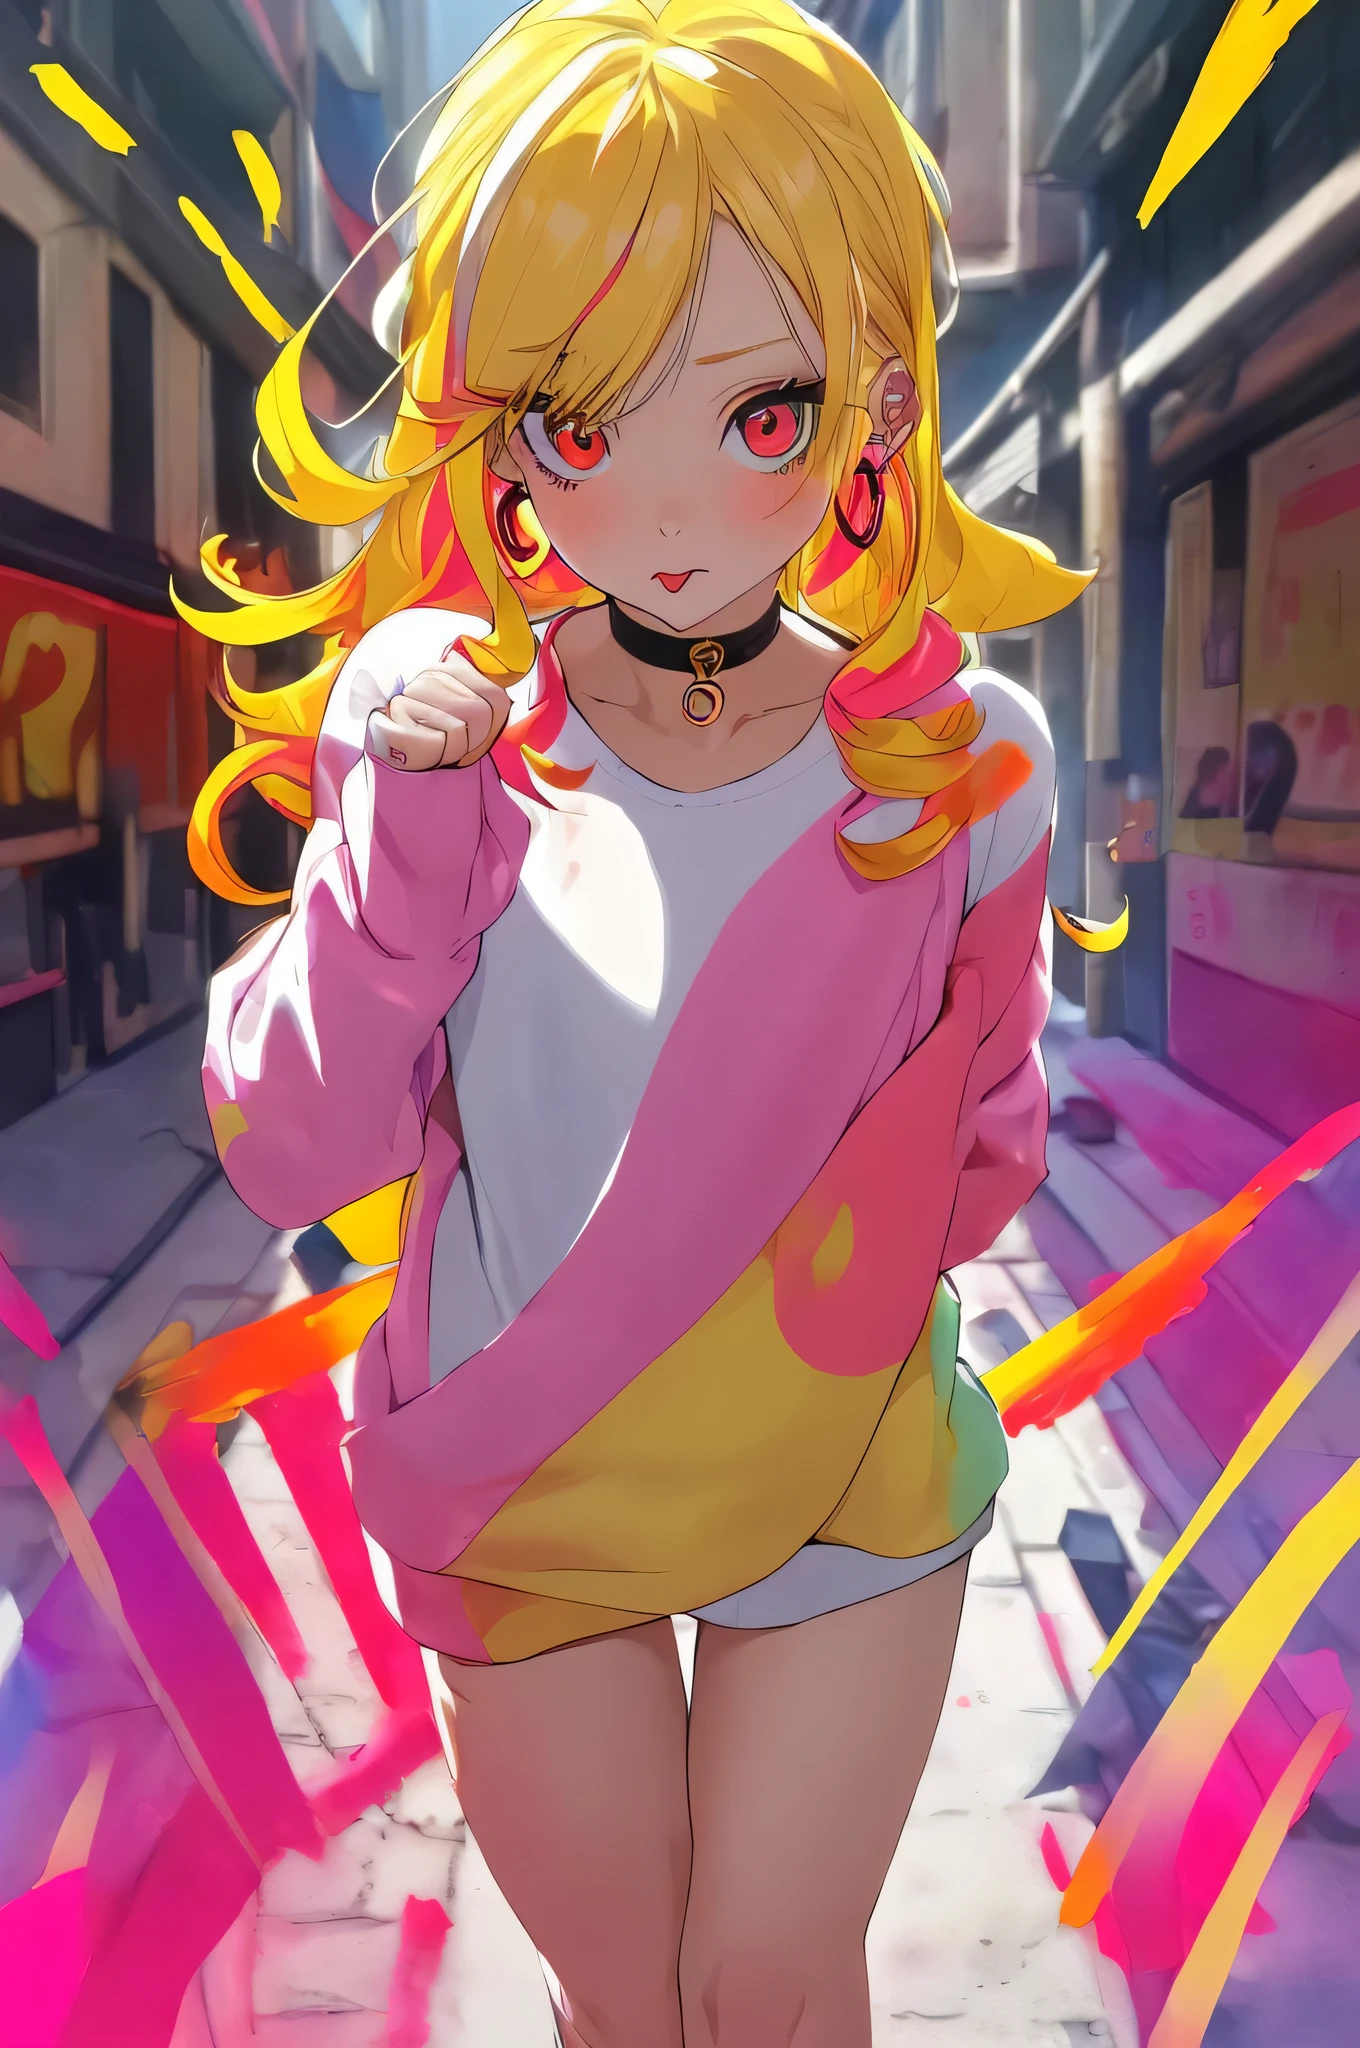 Upper body standing painting, yellow style, (1 ), (alone), (cent, small), long blonde hair, looking at the viewer, Blue eyes background, white background, gem, Jacket, golden hair、straight hair, right earring, red eyes, choker necklace, sweater, eyelash, cosmetics, curly, punching, lipstick, ear piercing, eye shadow, hoop earrings, Red-pink lips, multicolored eyes, Yellow theme, 赤いeye shadow,Wearing a rainbow-colored aura from the whole body、purplish color, outdoor, Purple background, Shadow lighting,Hands folded behind the waist,Decisive pose、Detailed CG, (perfect hands, perfect anatomy)、stick out tongue（1:3）、Happier appearance